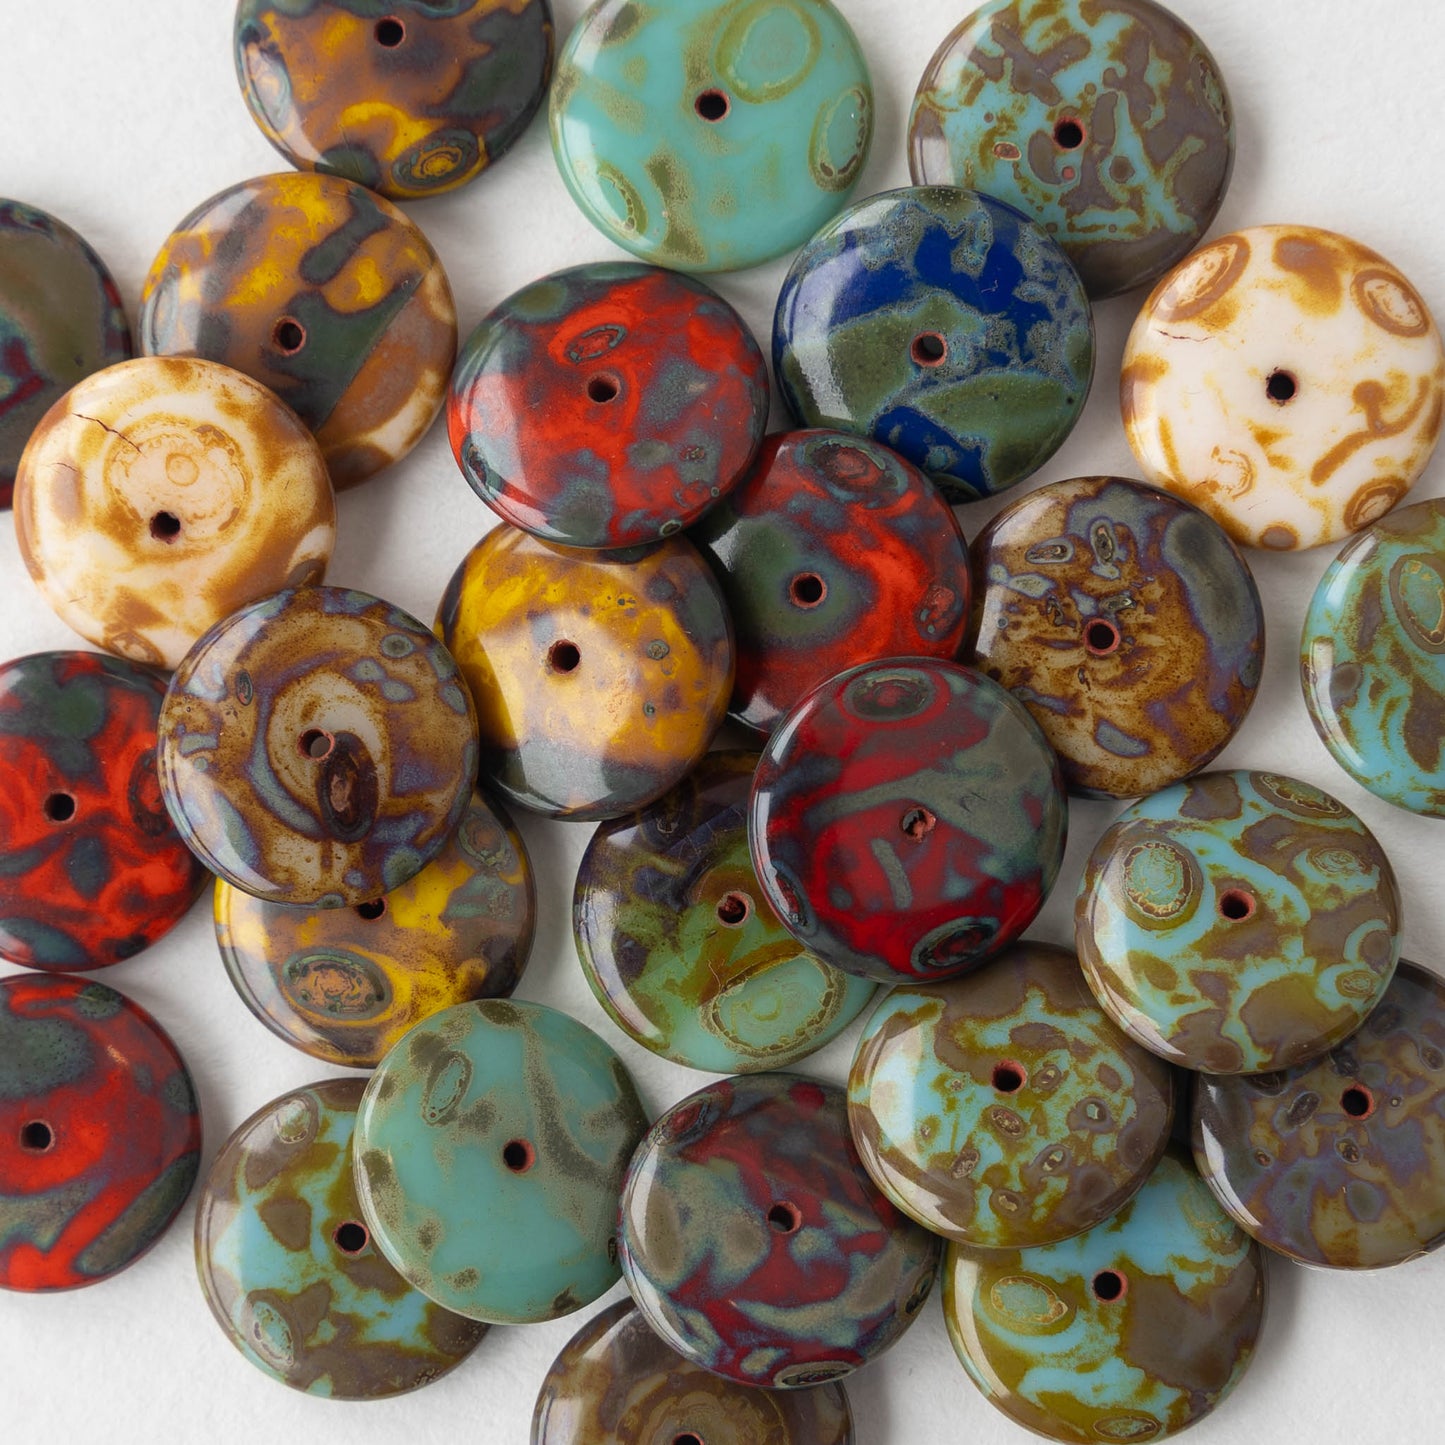 16mm Rondelle Beads - Picasso Mix - 10 Beads